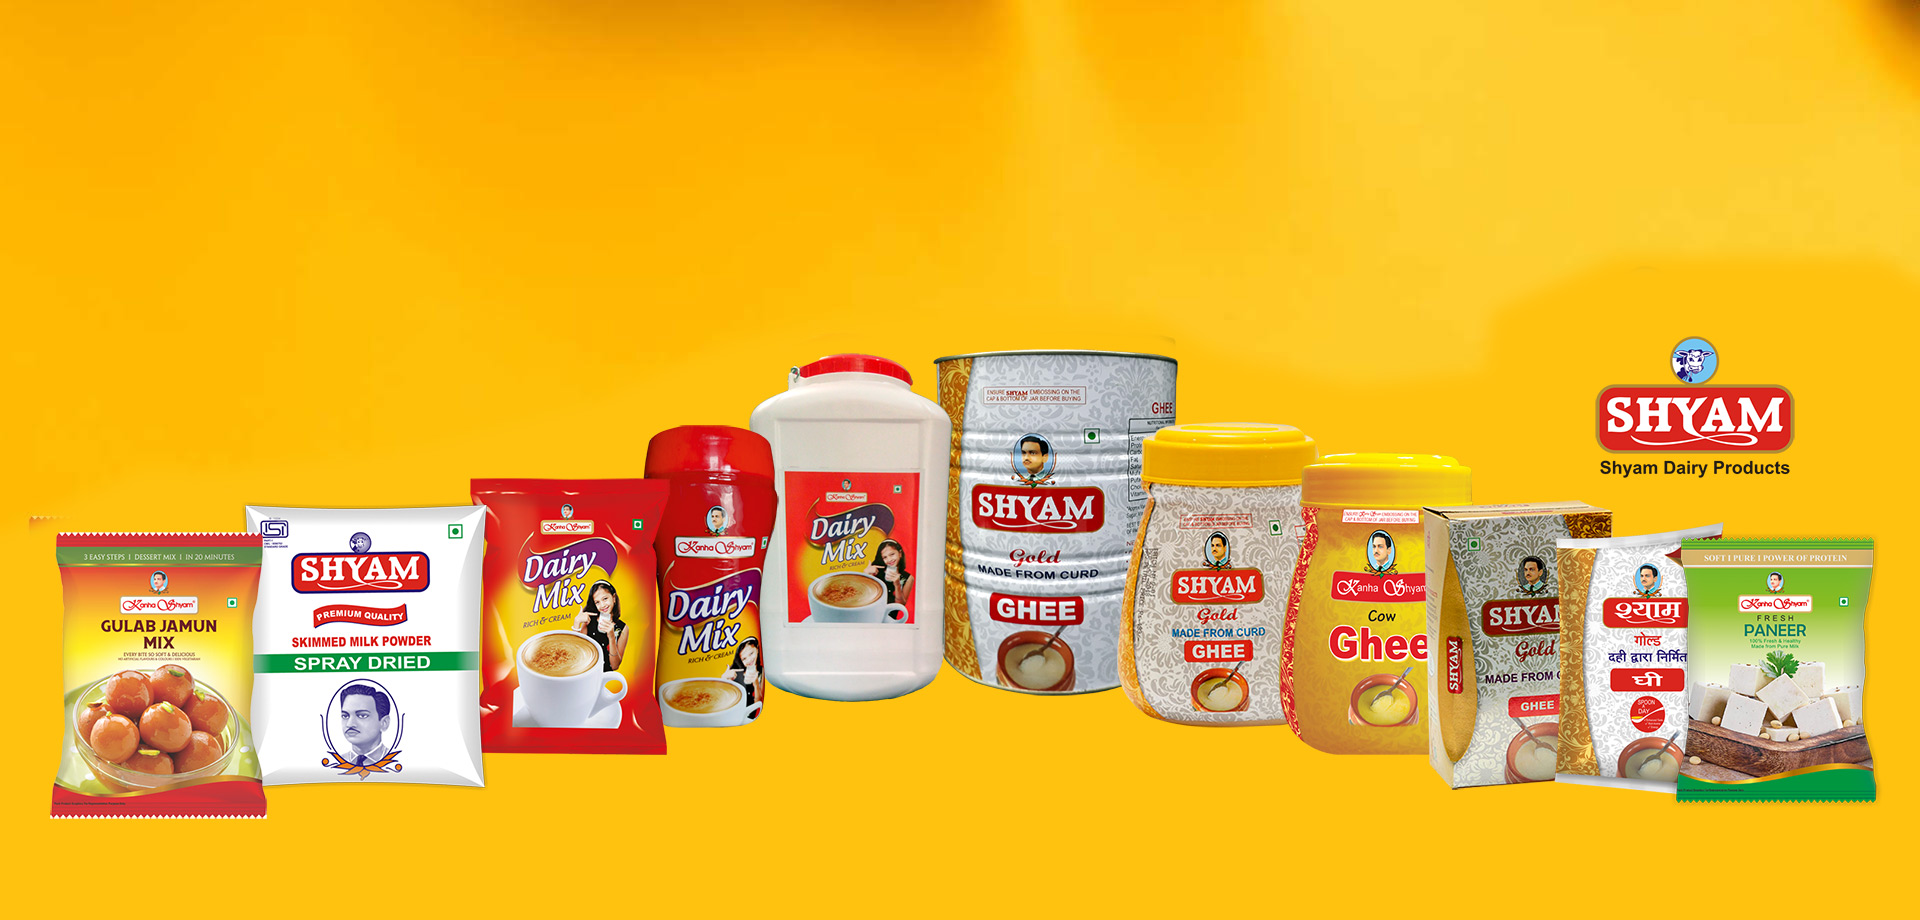 Shyam Dairy Products